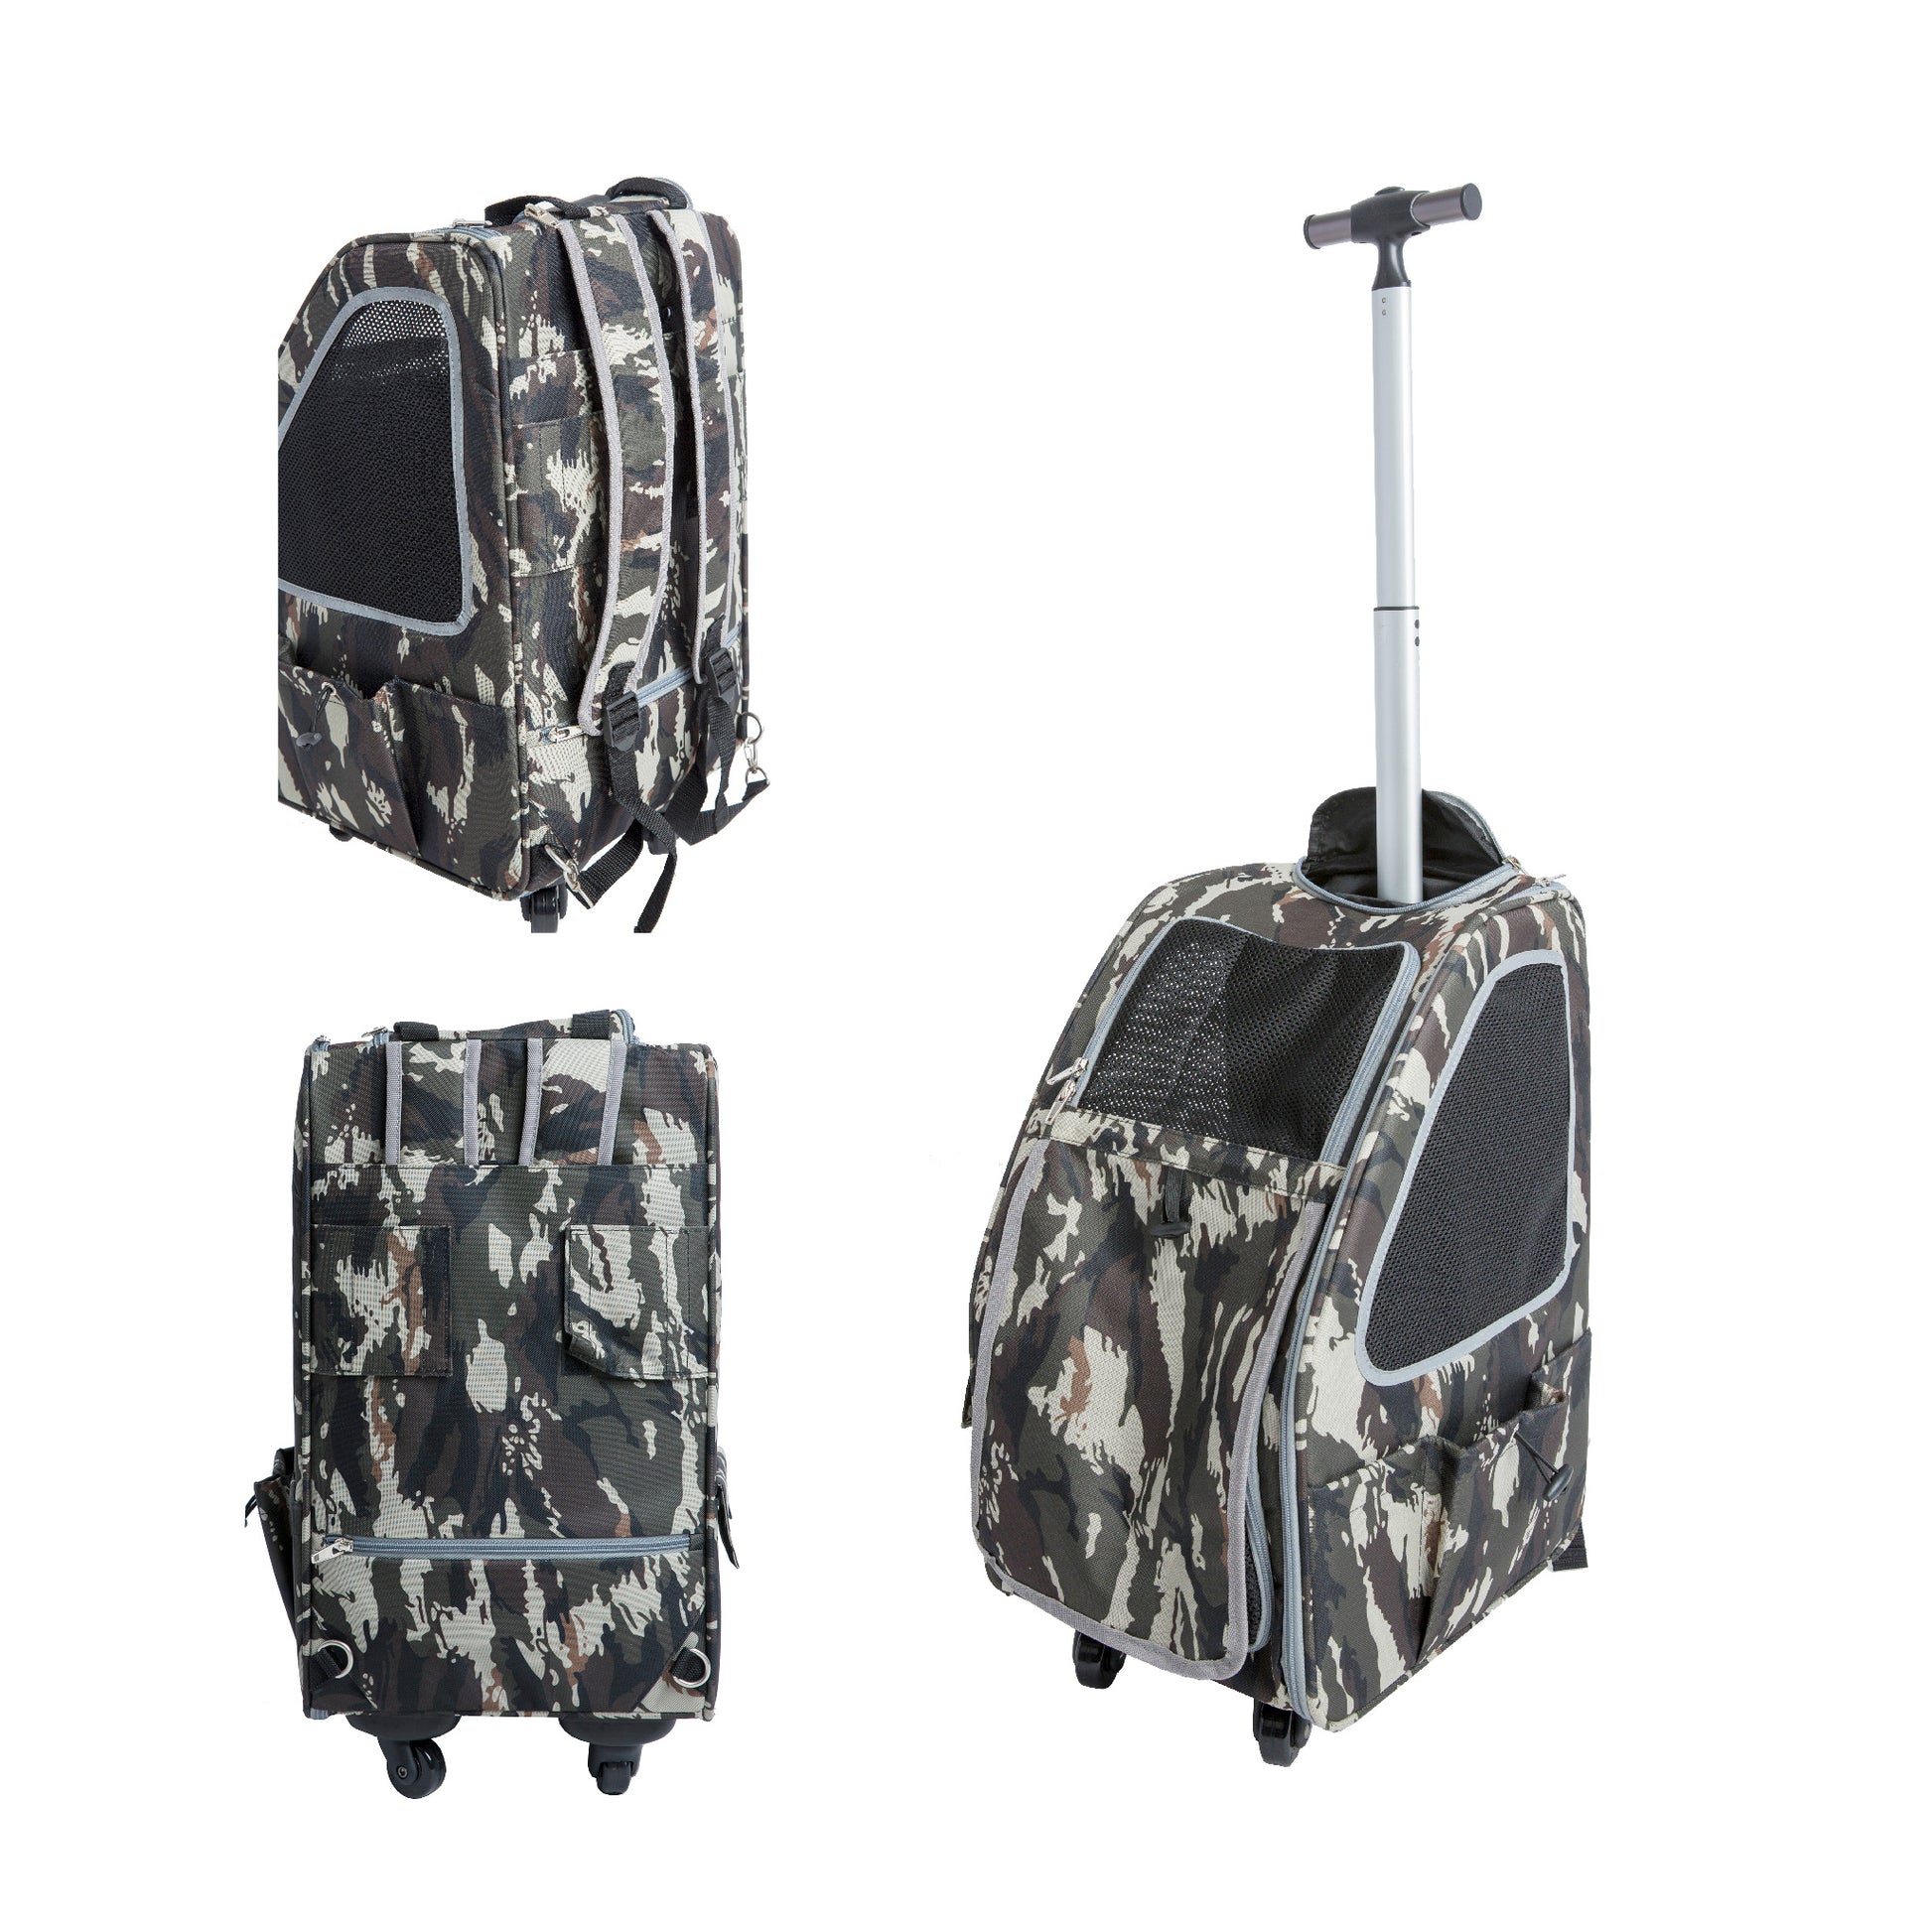 Vibrant Life Small Pet Travel Carrier - Black & Tan - 17 x 10.5 x 11 in